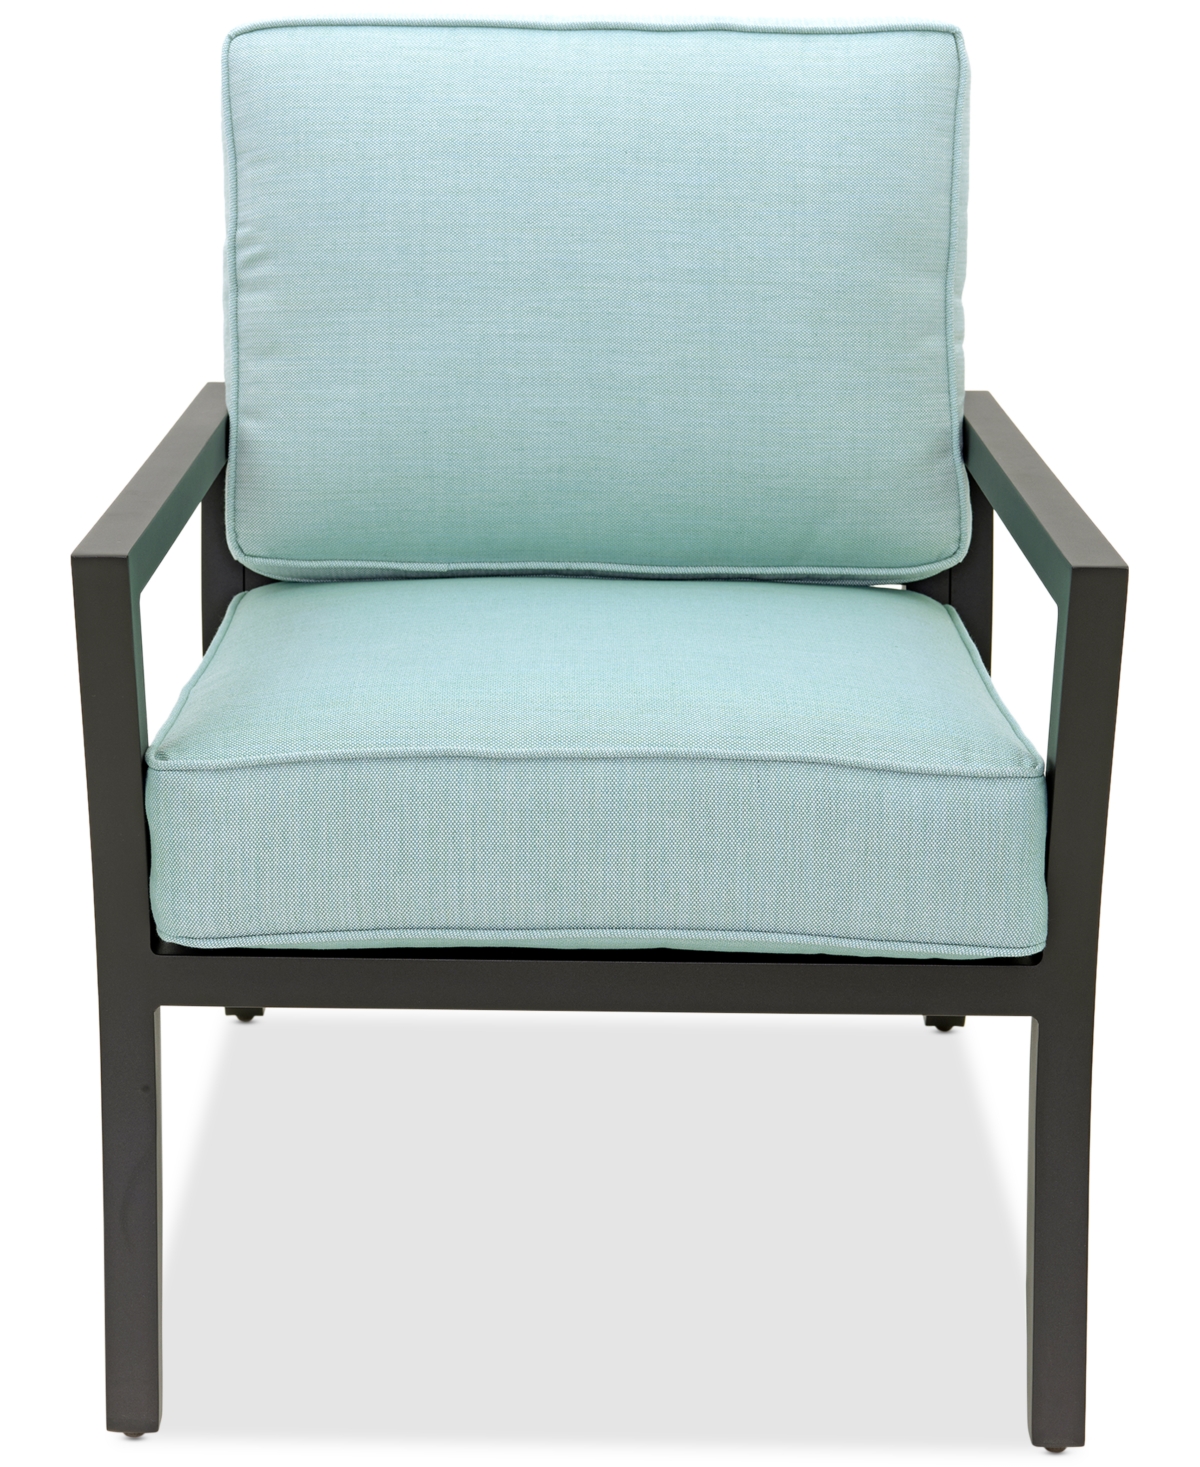 Shop Agio Astaire Outdoor 3-pc Lounge Chair Set (2 Lounge Chairs + 1 End Table) In Spa Light Blue